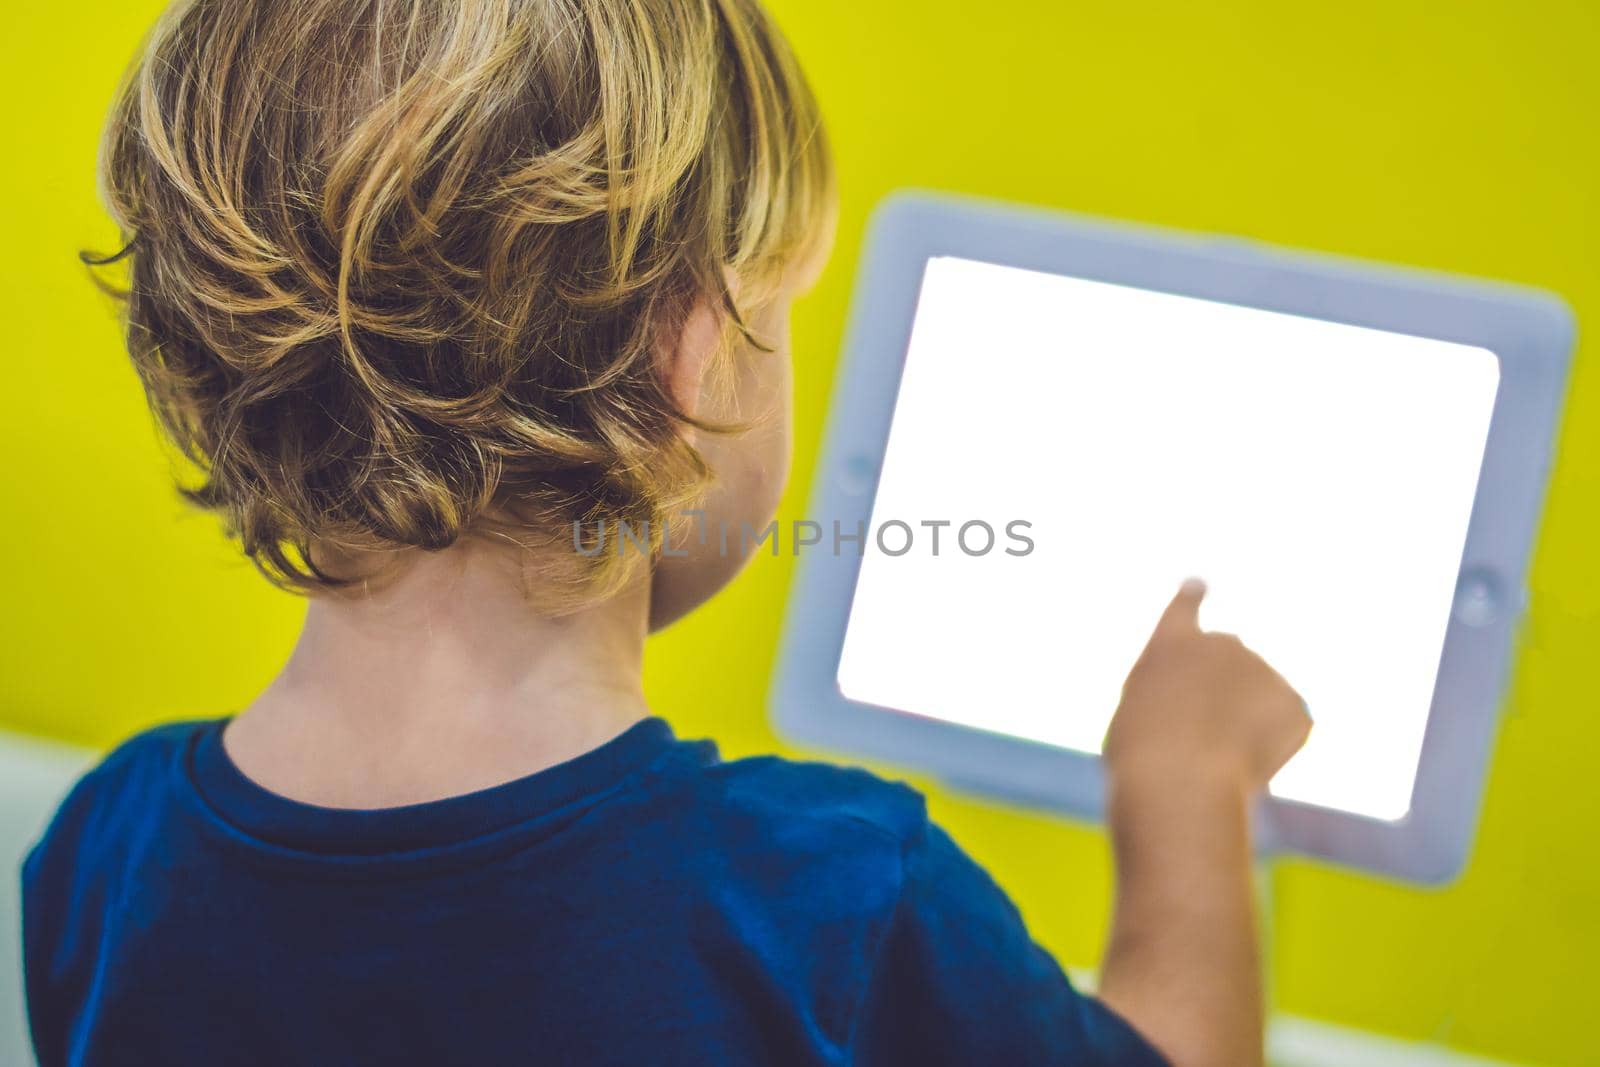 Boy playing with digital tablet. Children and technology concept by galitskaya